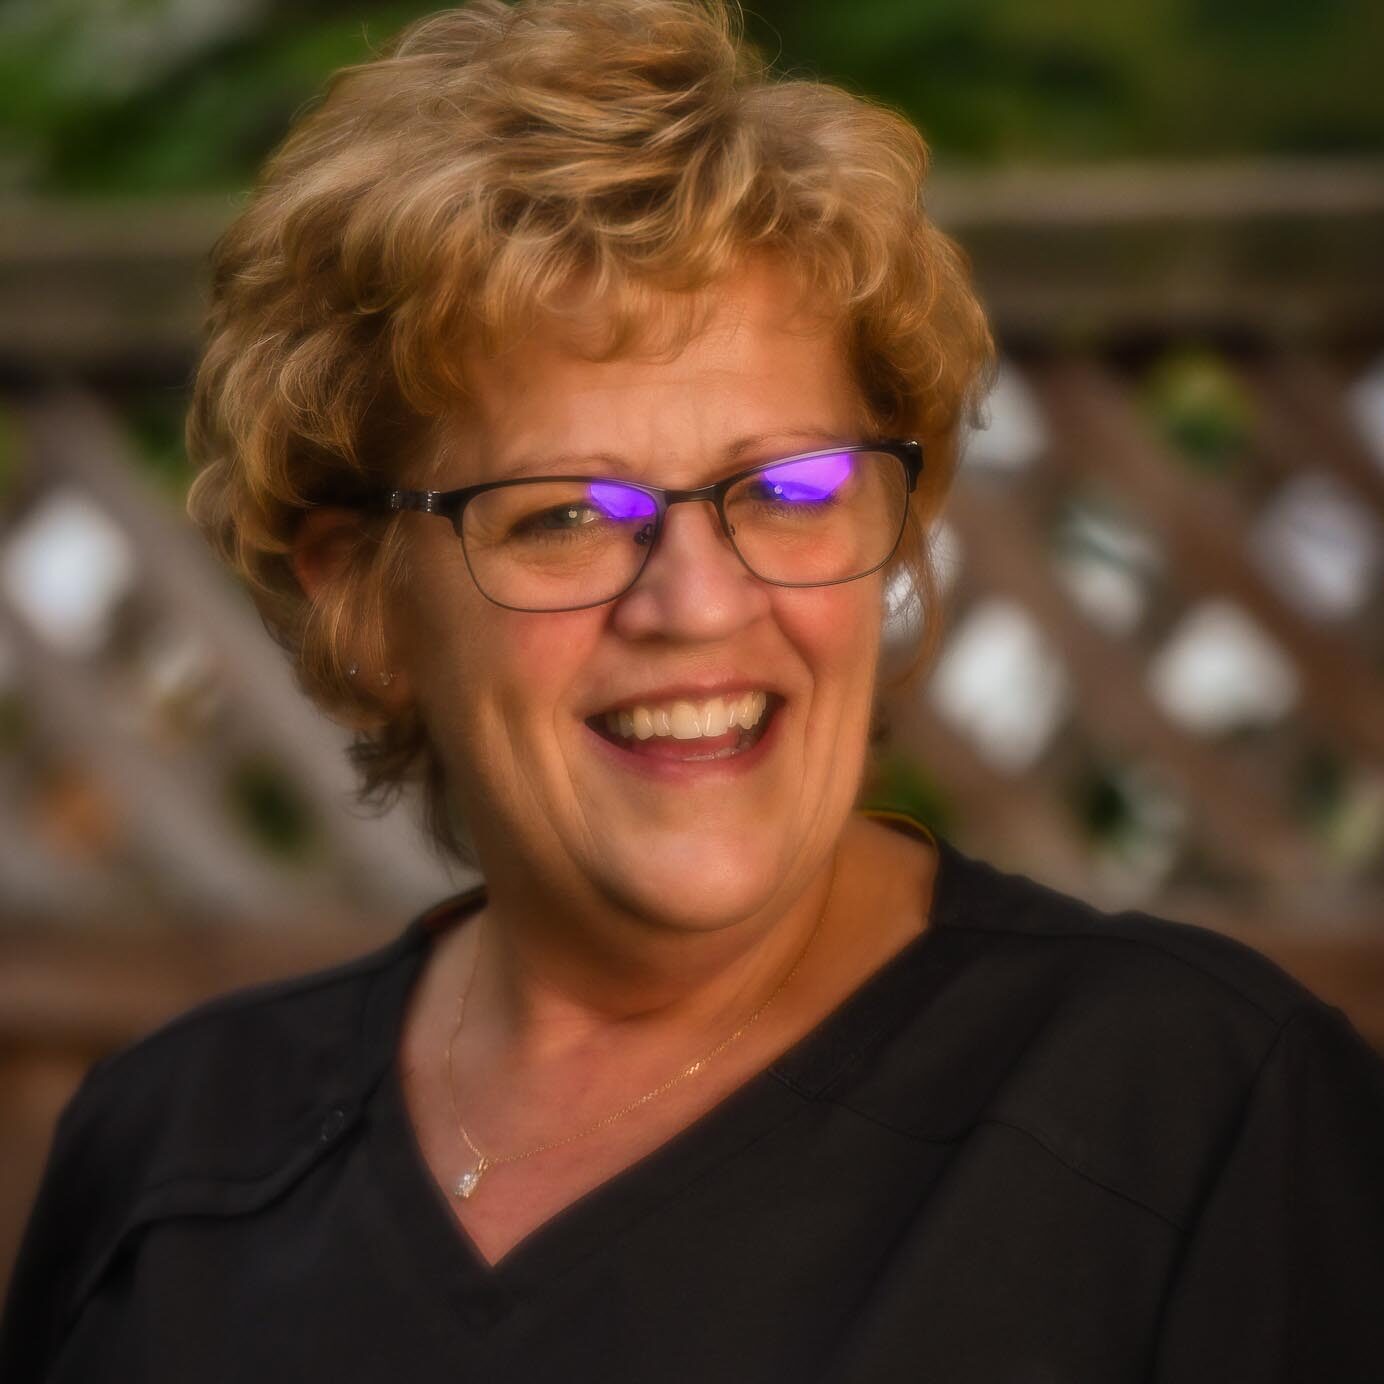 A woman with glasses and a black shirt smiling, radiating warmth and confidence. She is Julie, Scheduling and Insurance Coordinator at Clinton Family Dental.